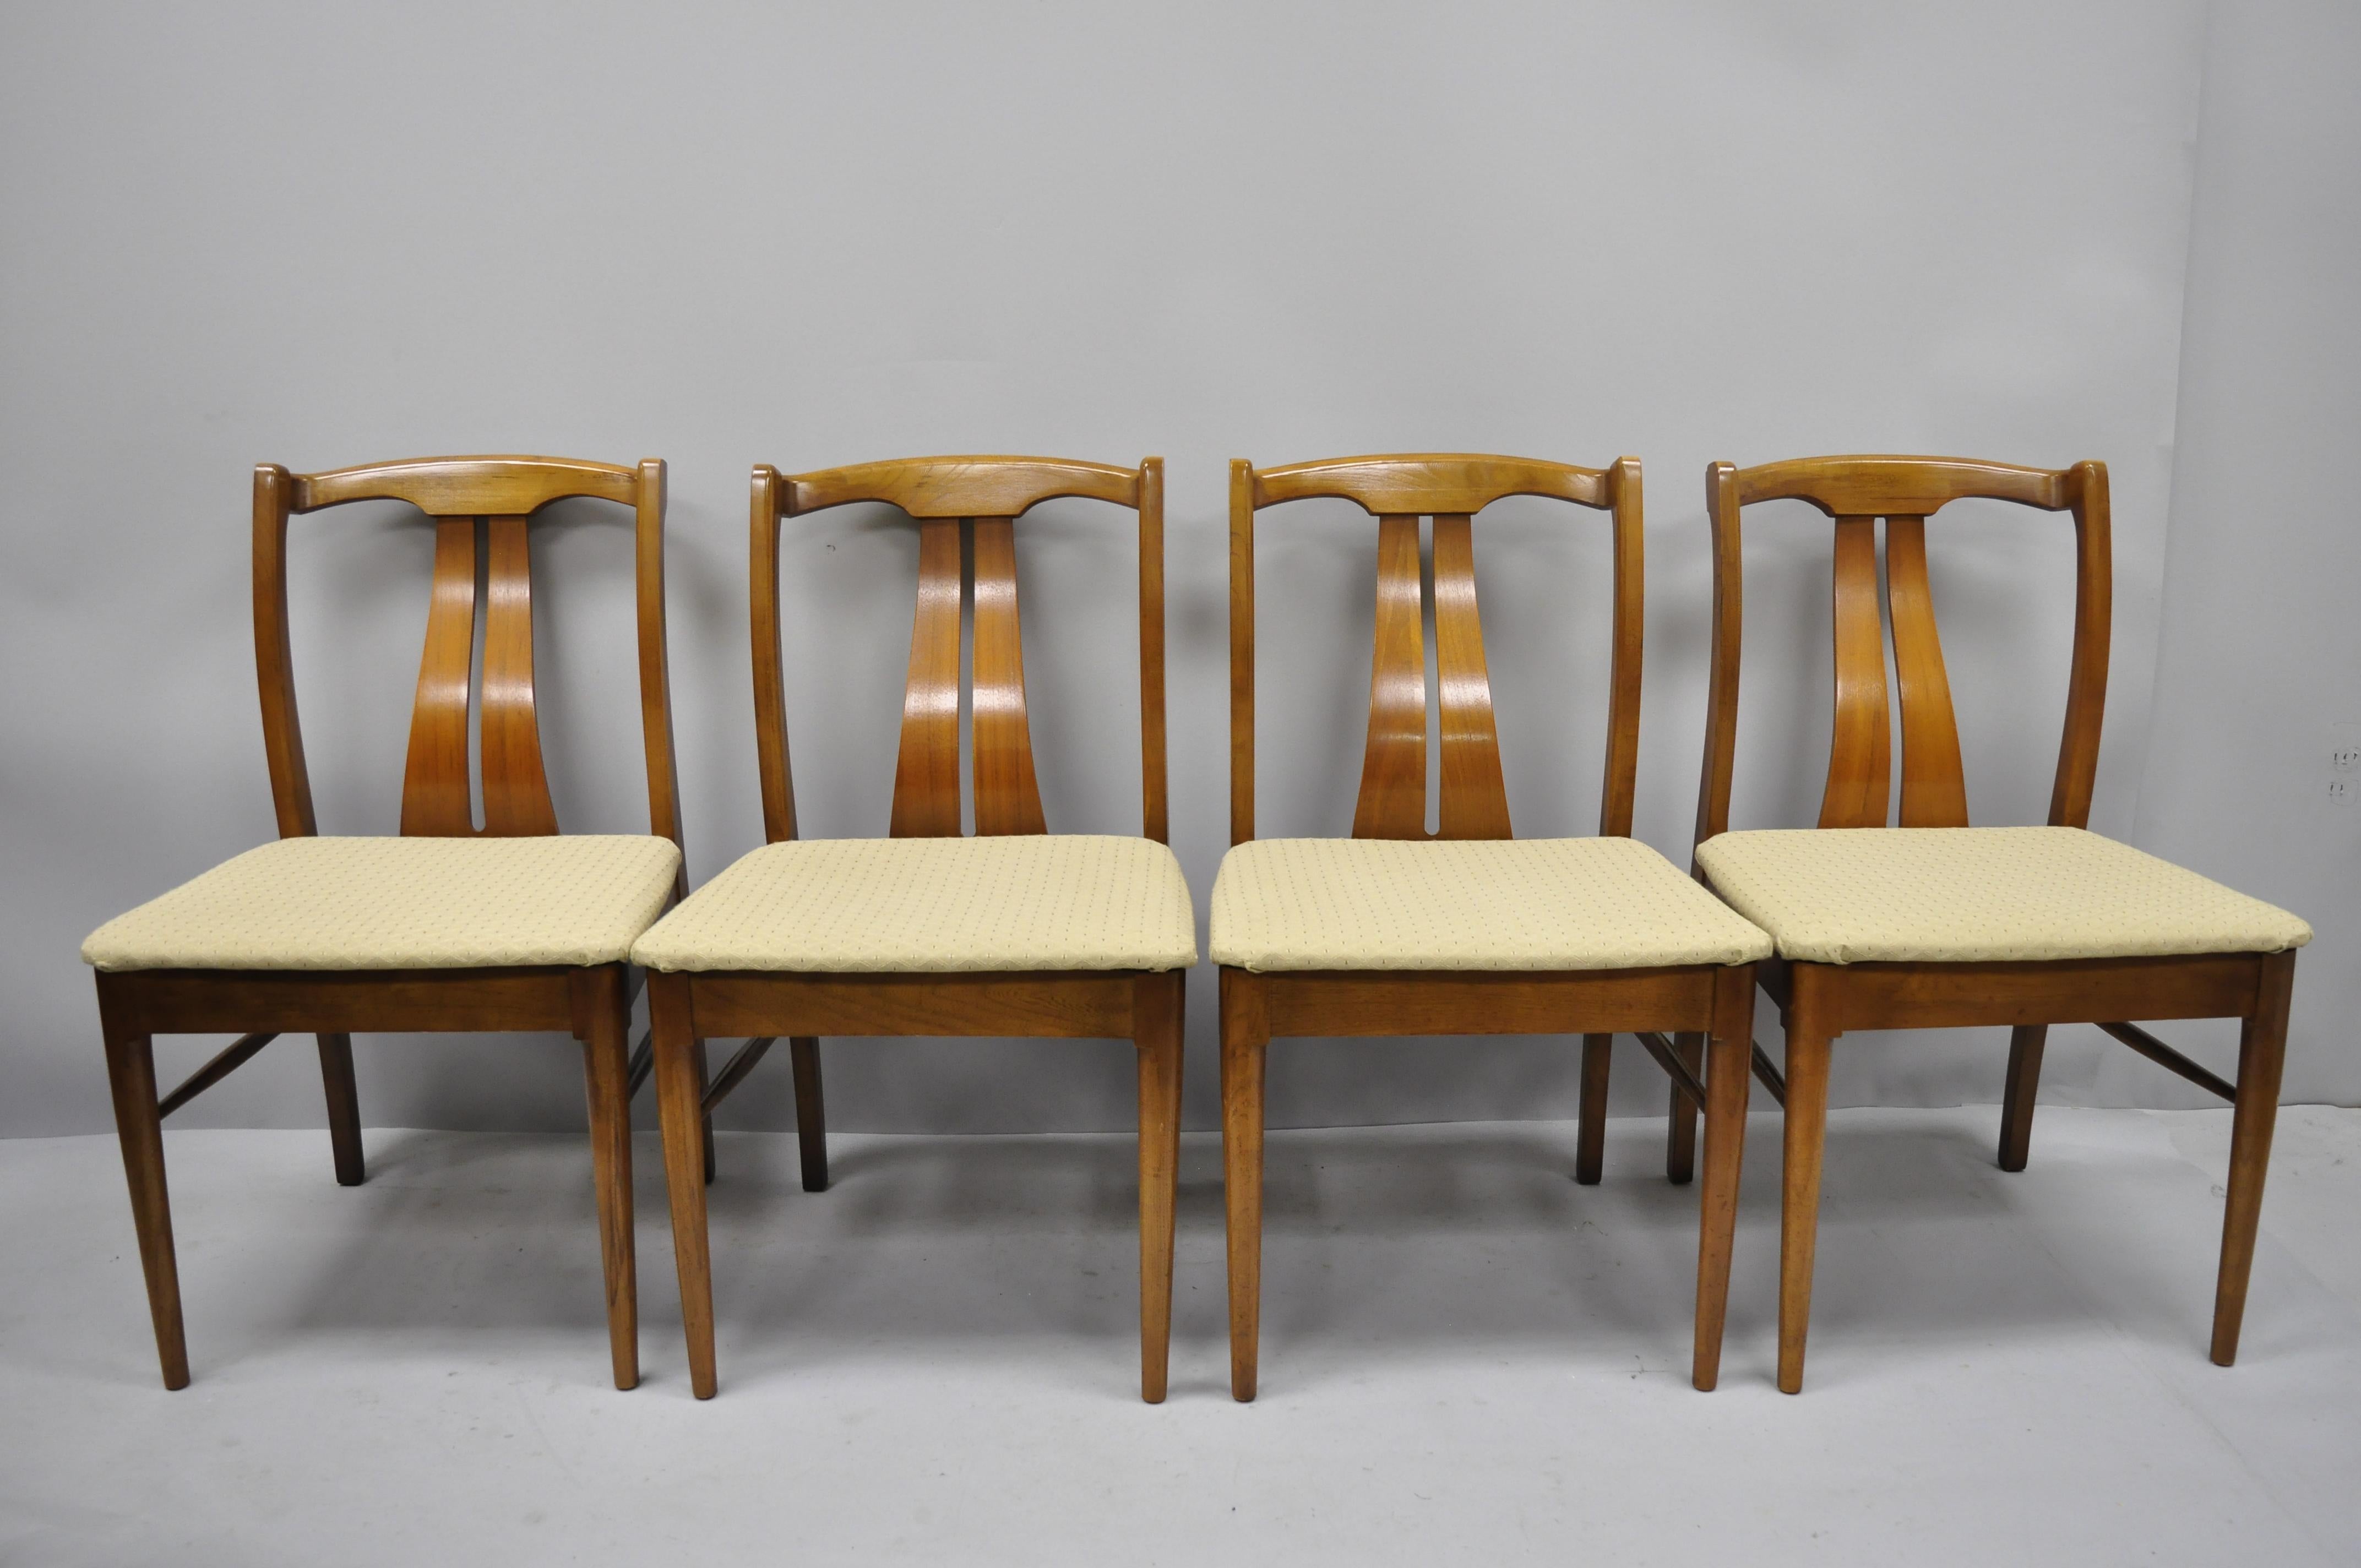 4 vintage Mid-Century Modern curved back sculpted walnut dining chairs listing features solid wood construction, beautiful wood grain, tapered legs, & sleek sculptural form, circa mid-20th century. Measurements: 33